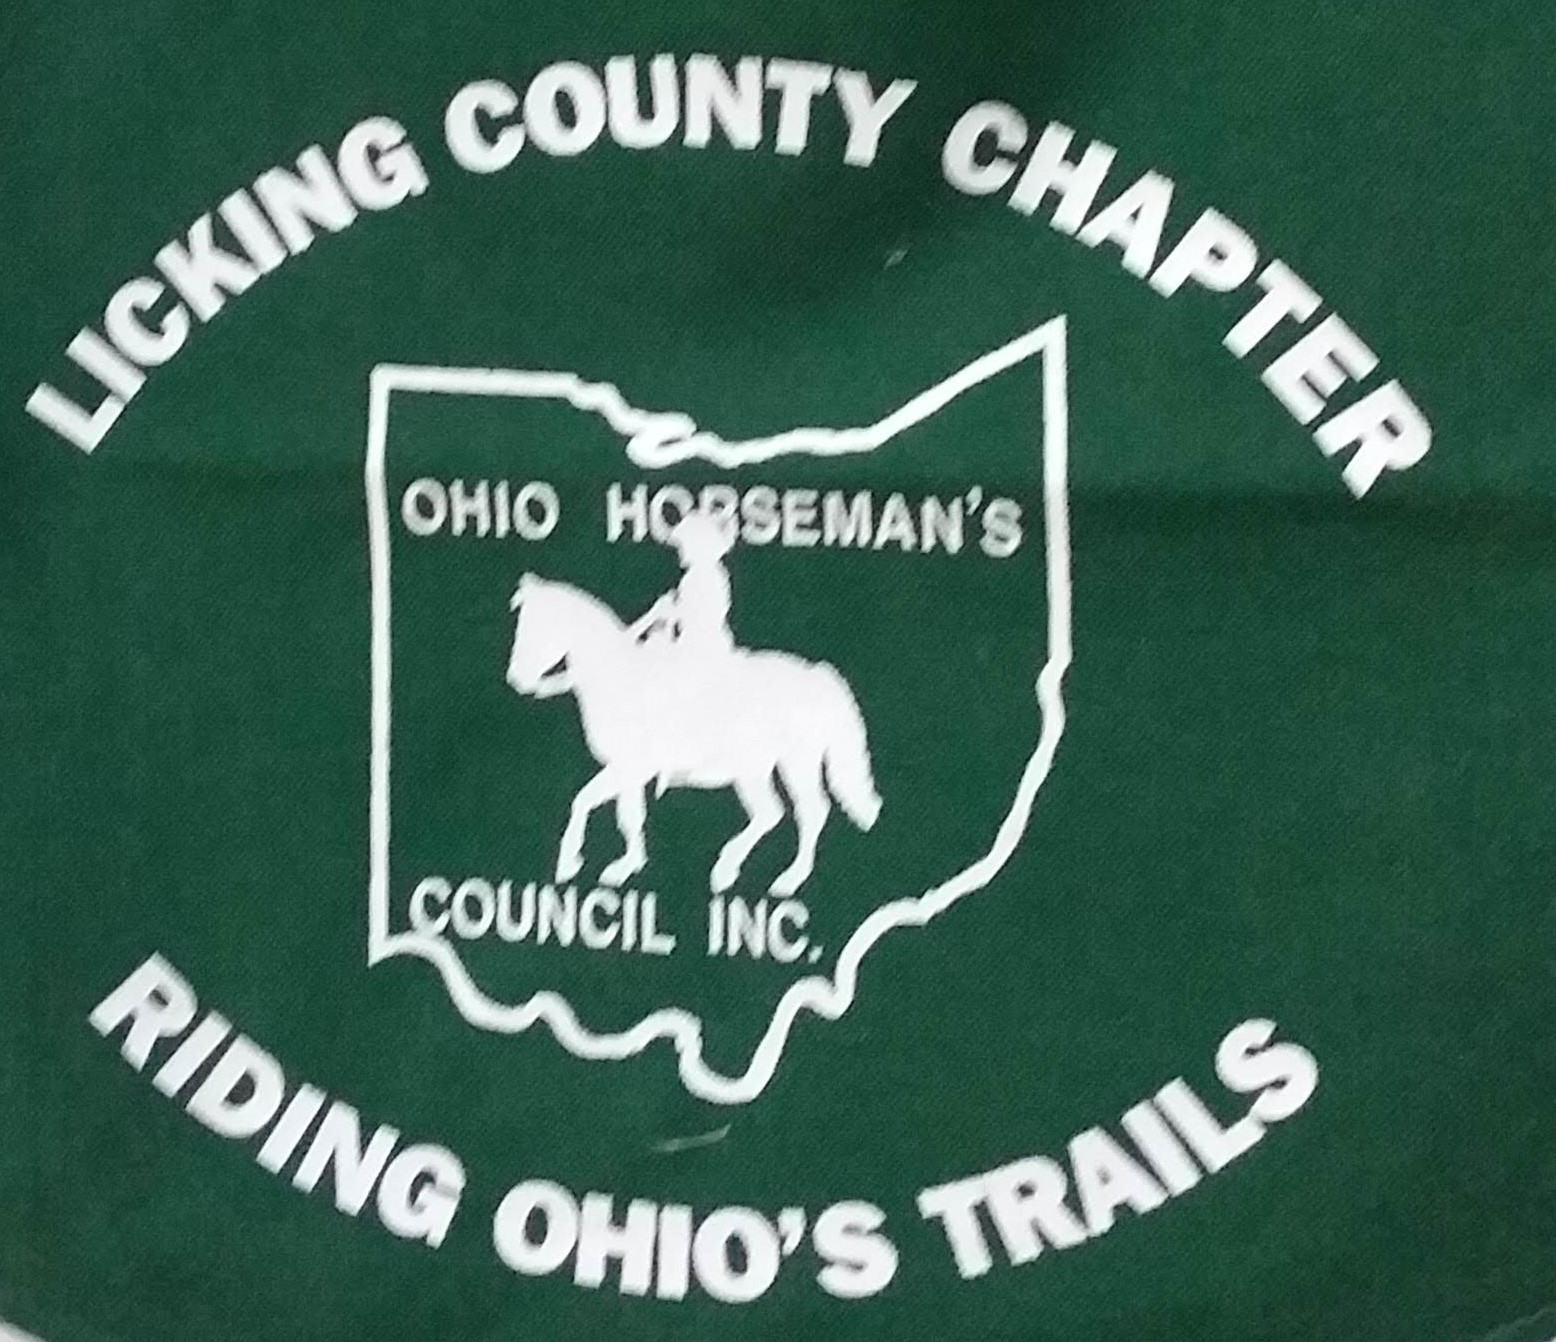 Licking County Chapter Ohio Horseman’s Council